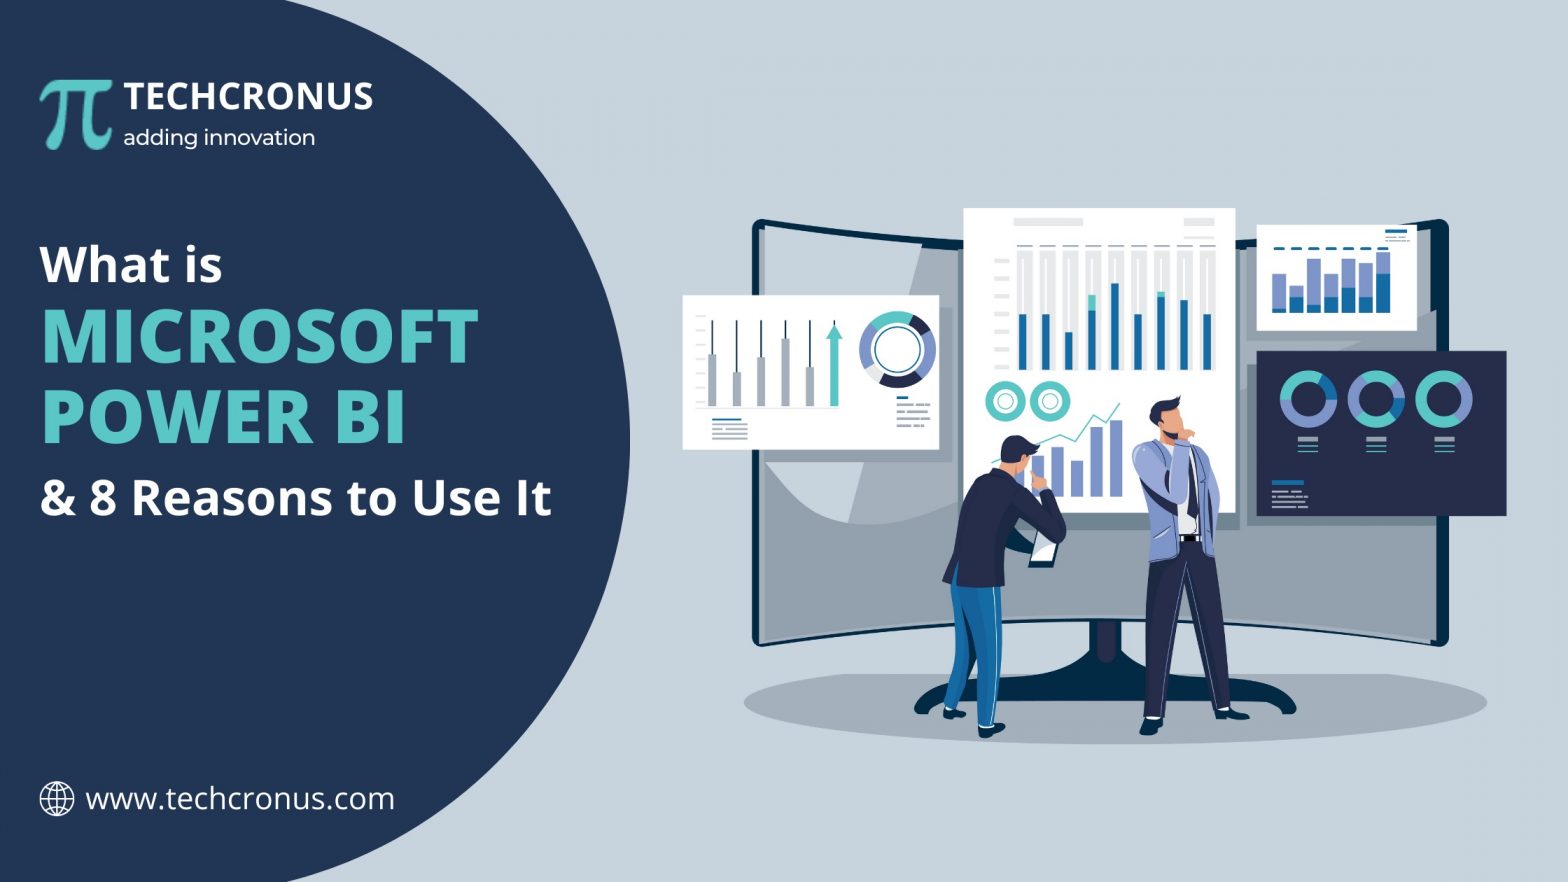 What is Microsoft Power BI & 8 Reasons to Use It